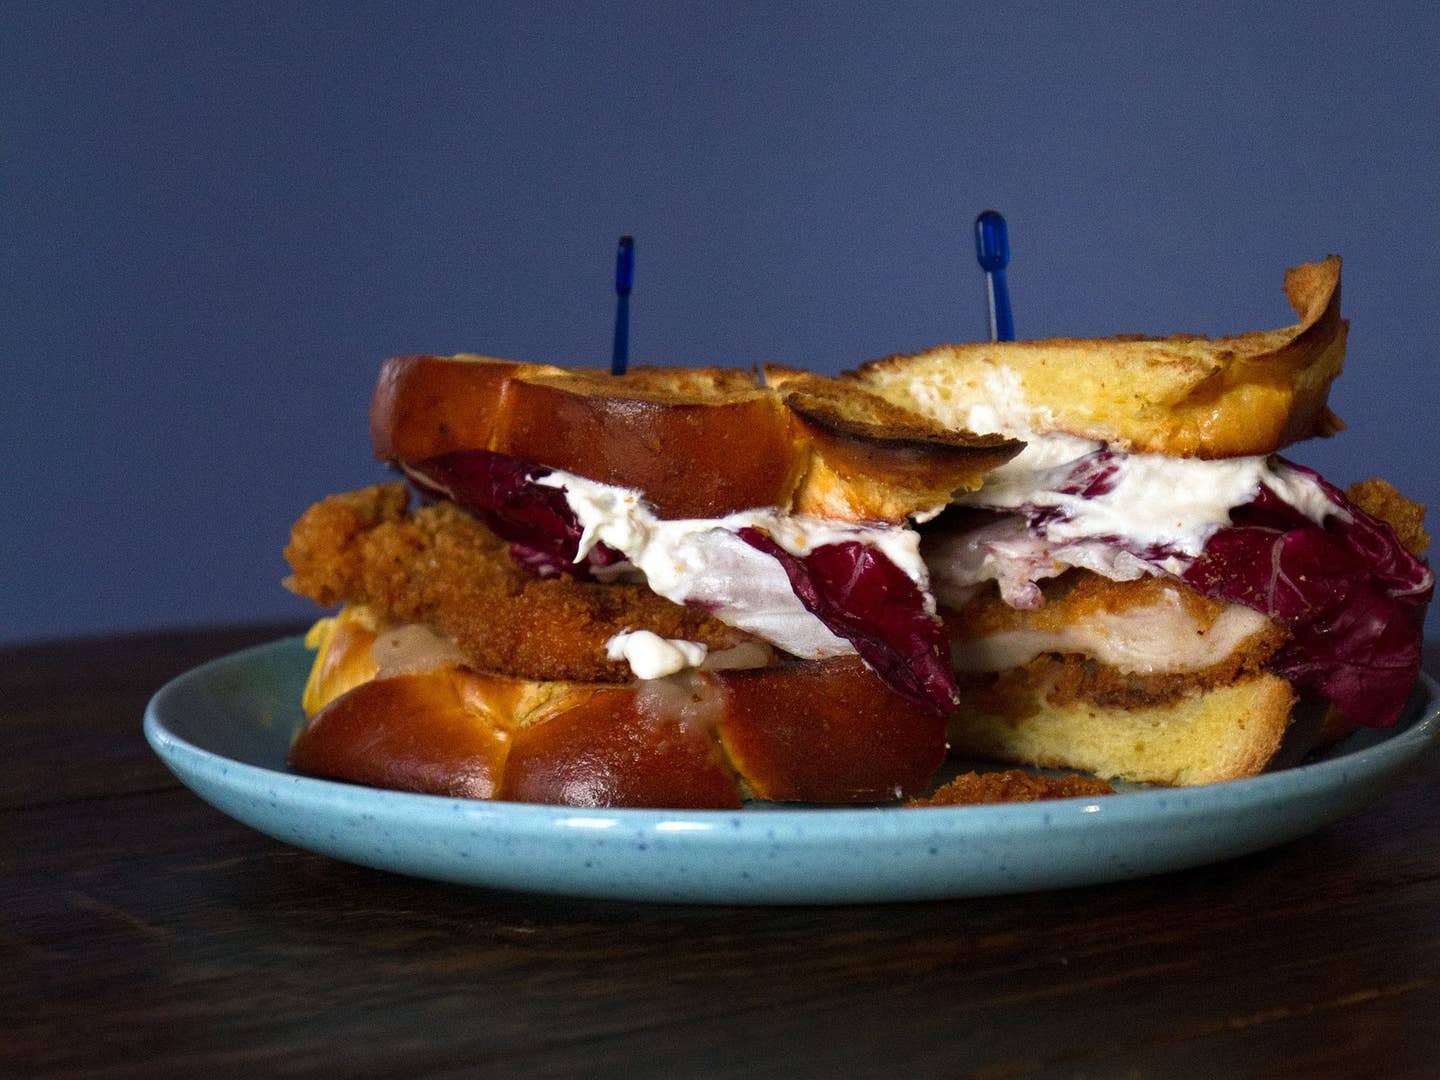 The 8 Best Chicken Sandwiches to Upgrade Your Workday Lunch